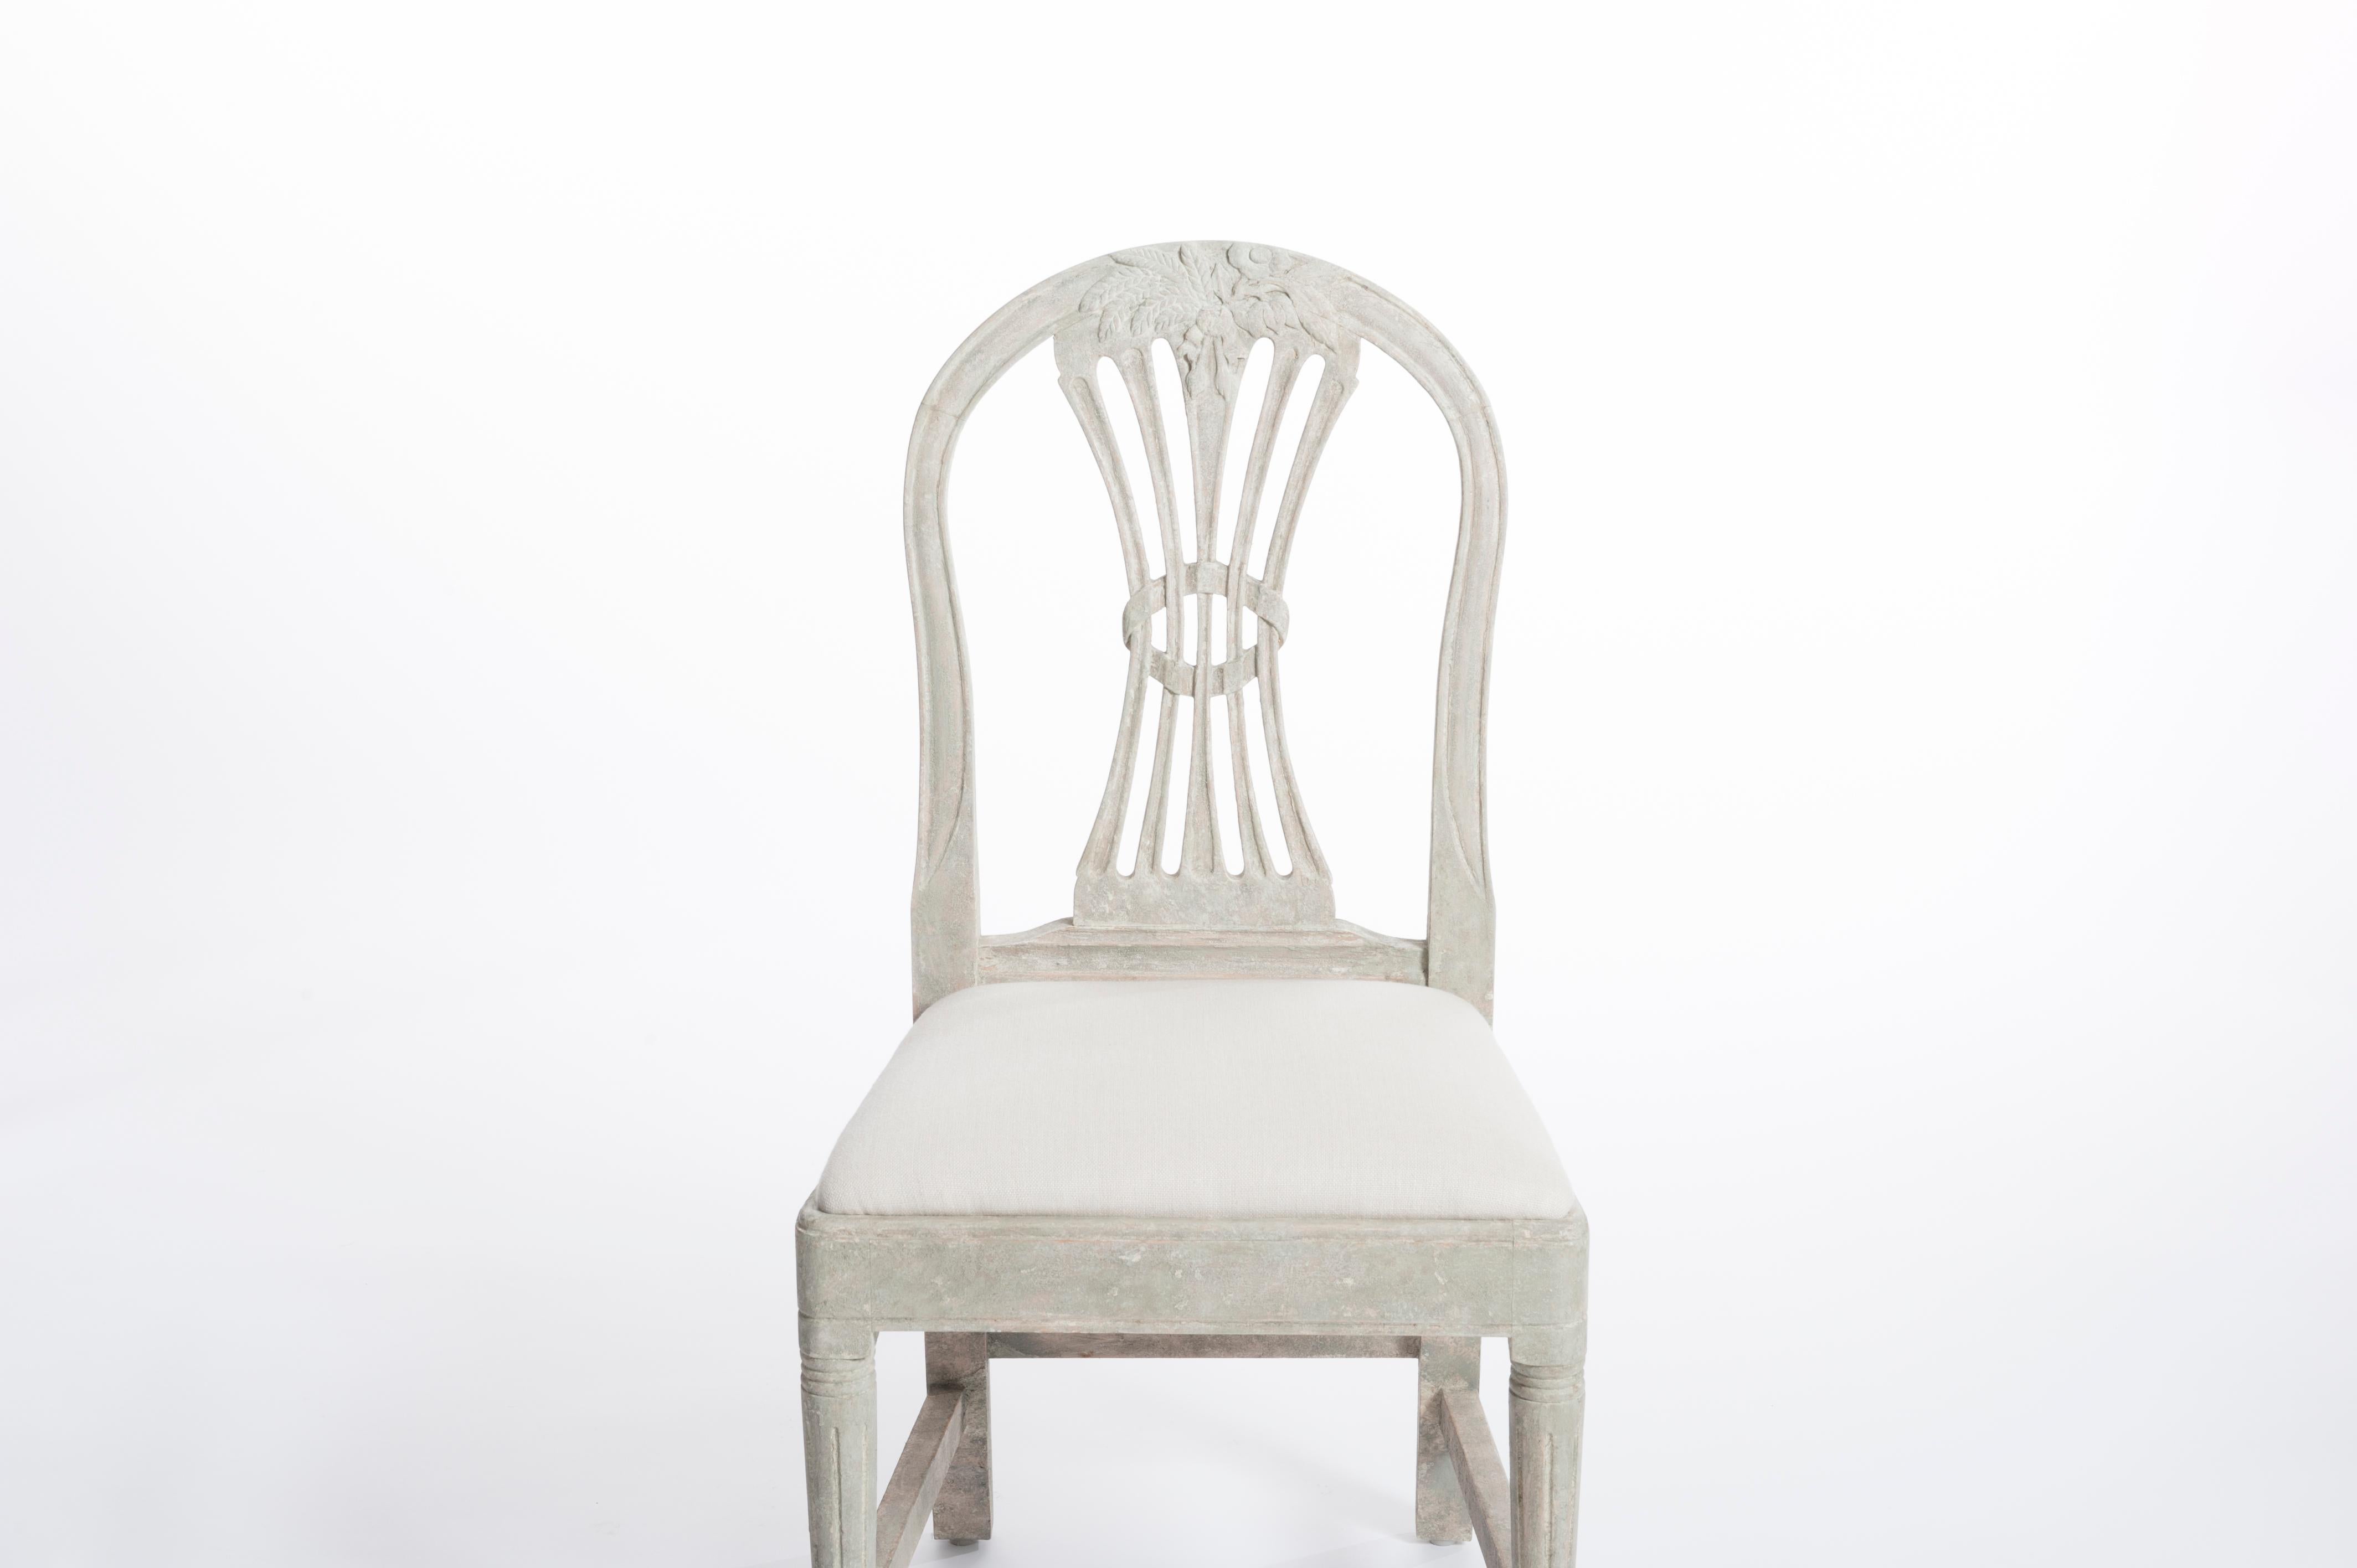 Linen 4 Hand Painted Gustavian Dining Chairs in Pale Green-Gray Color 19th Century